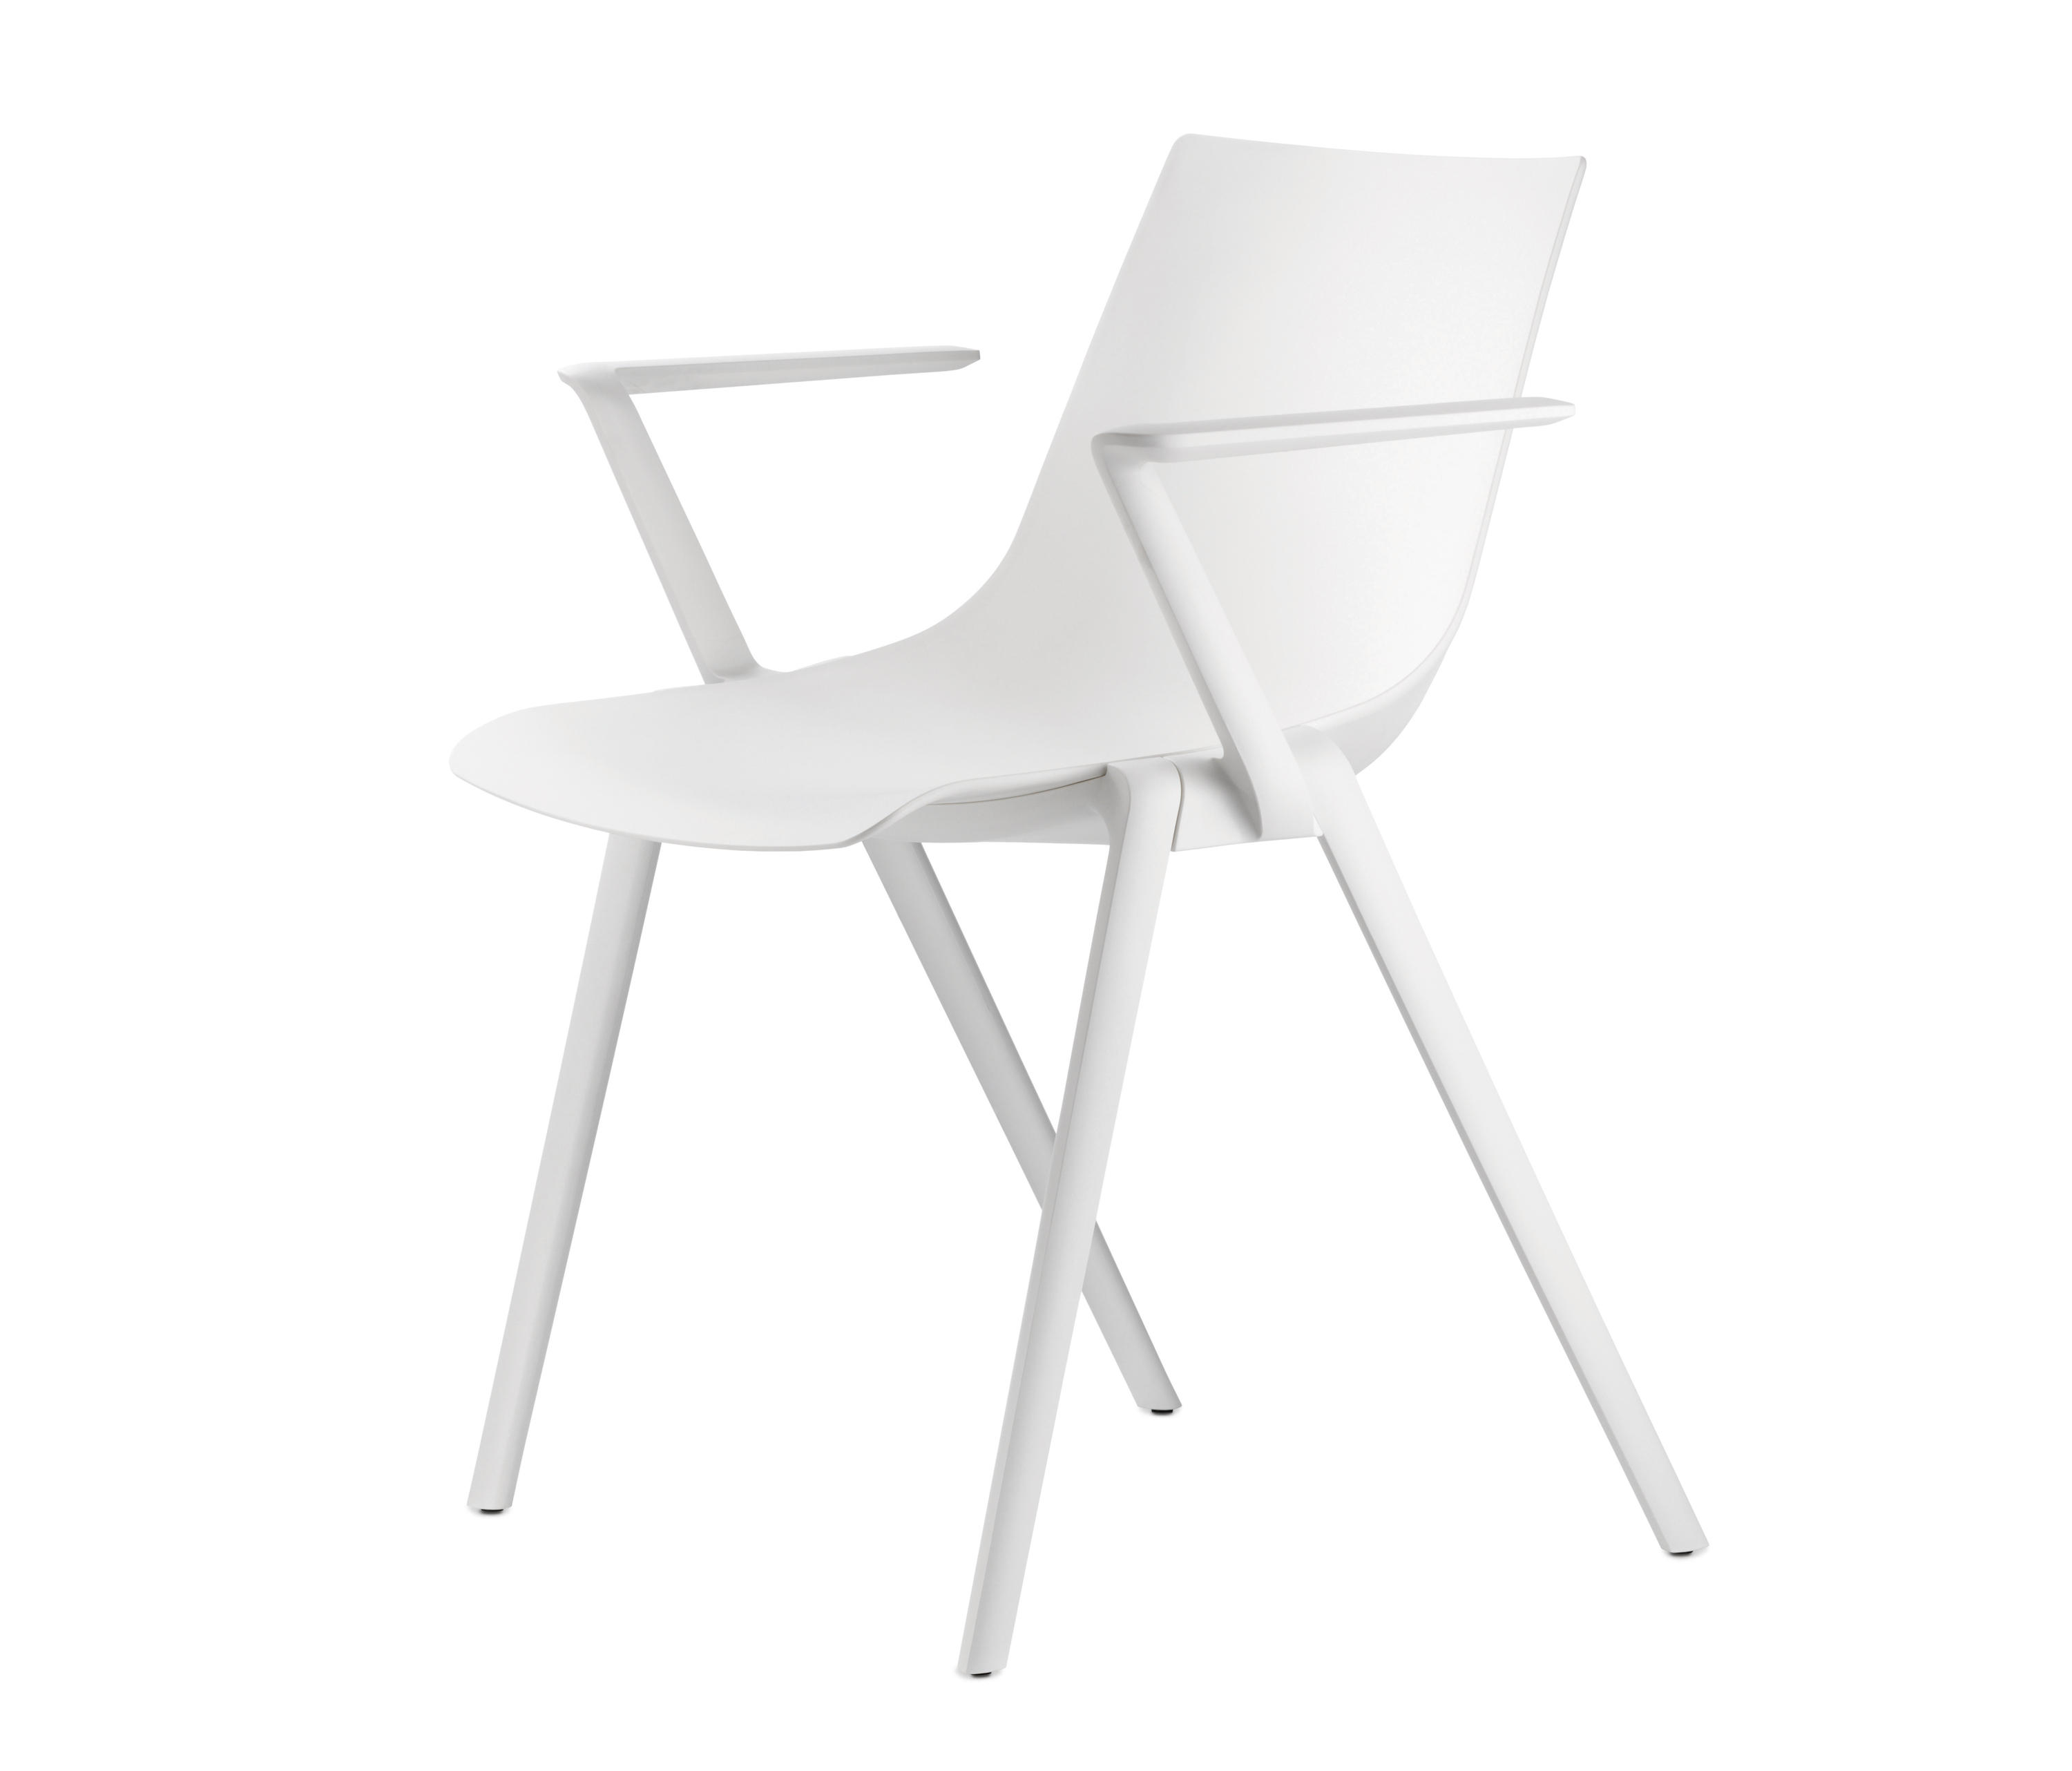 Aula Armchair by Wolfgang C. R. Mezger for Wilkhahn